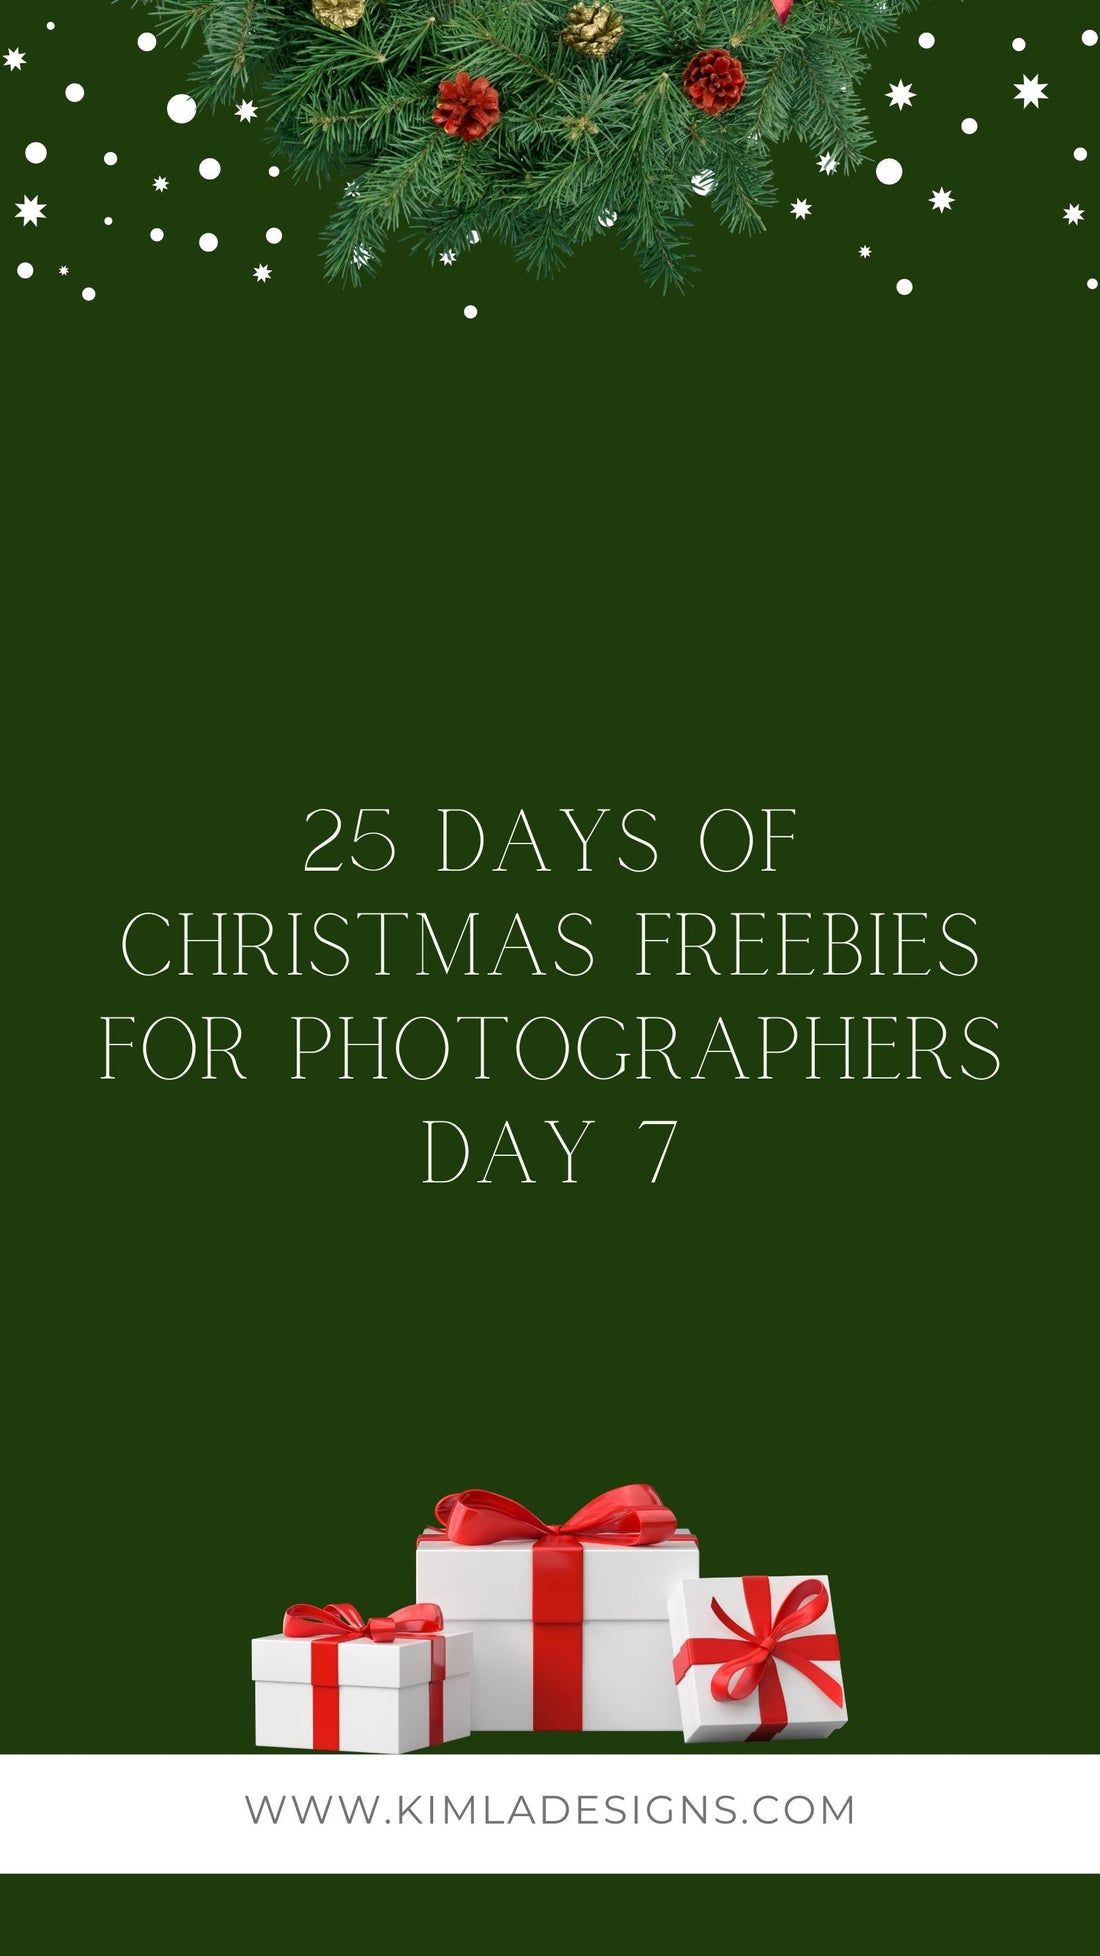 25 Days of Christmas Freebies Day 7th